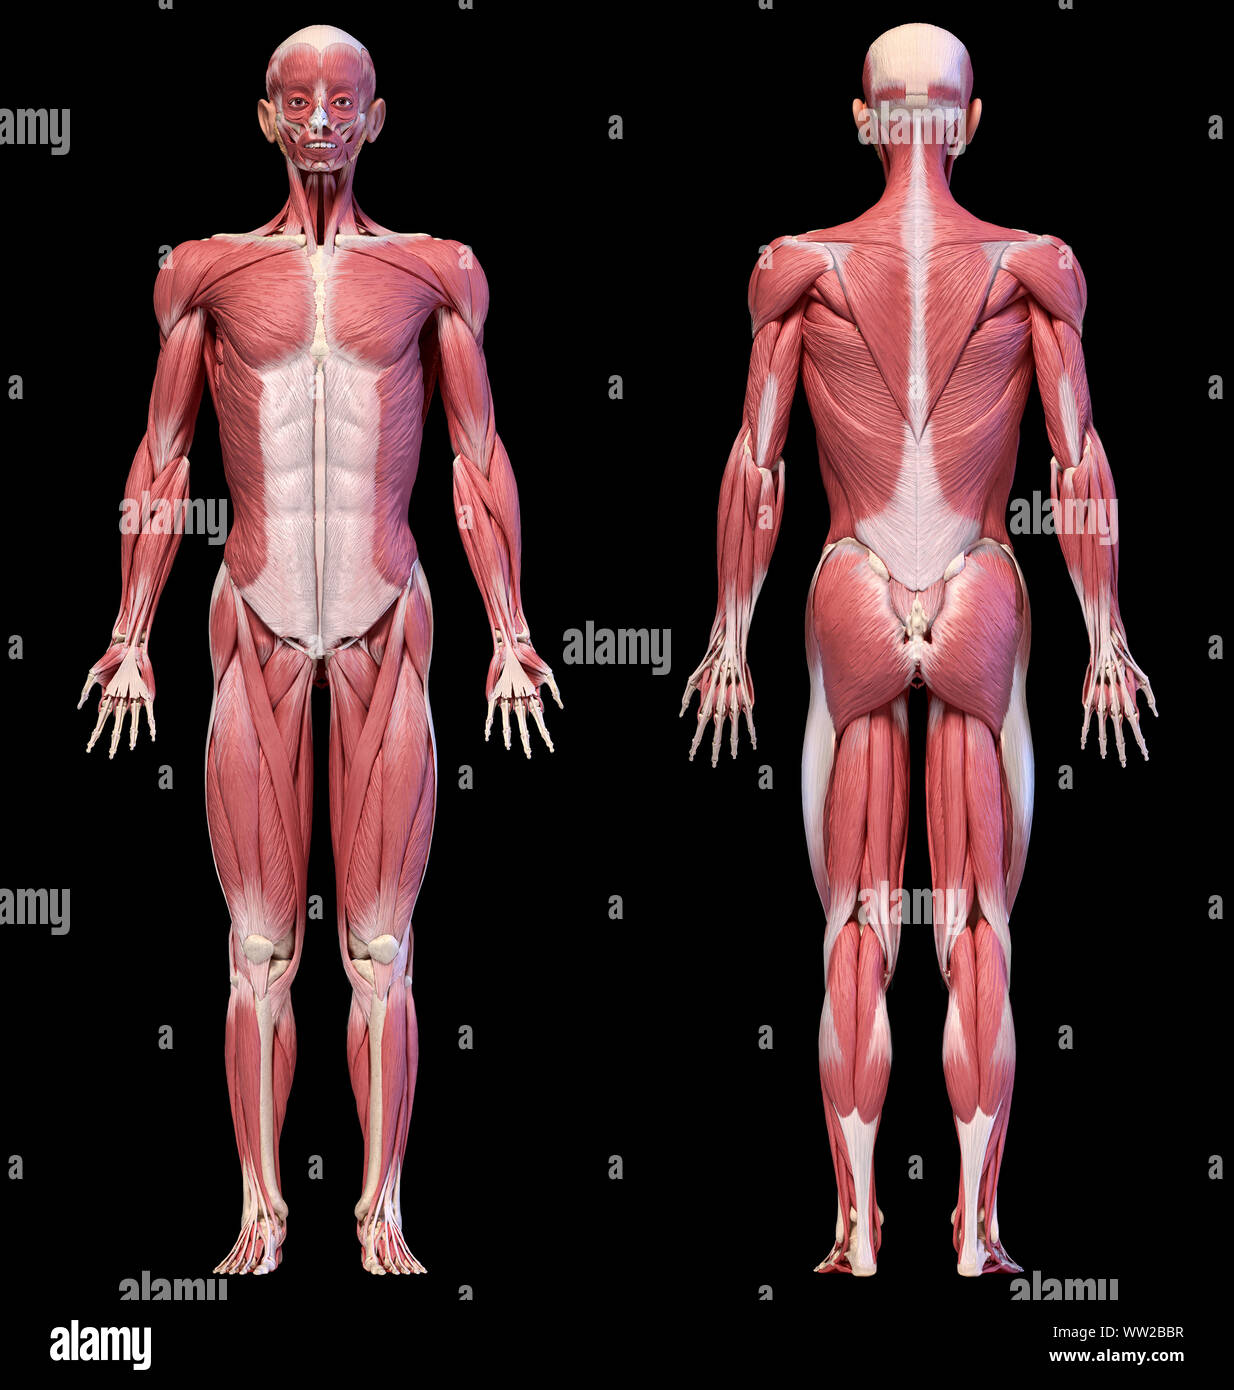 Human anatomy 3d illustration, male muscular system full body, front and back views on black background. Stock Photo